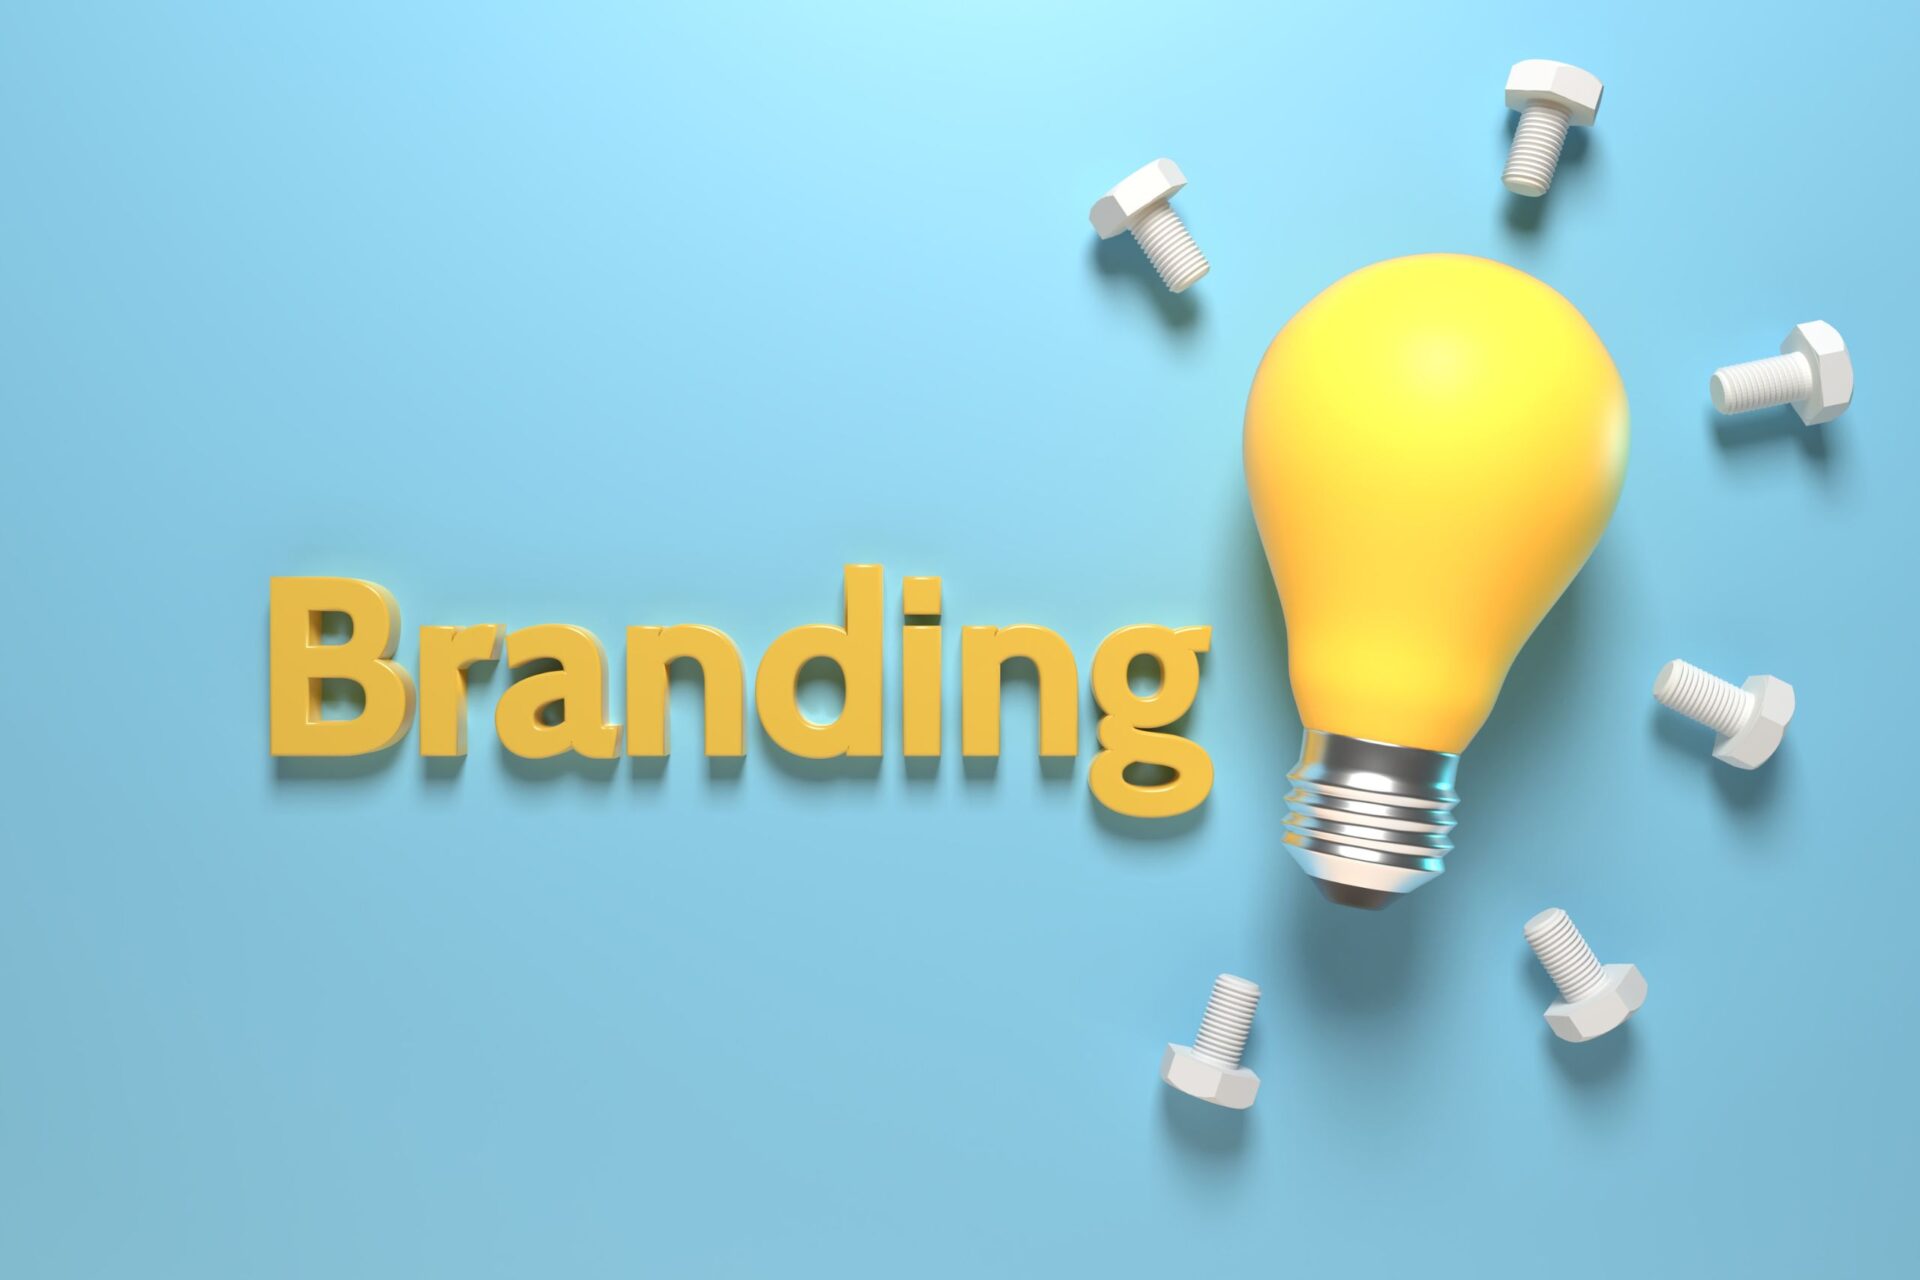 The word 'branding' next to a yellow lightbulb surrounded by screws appearing to be the light's glow